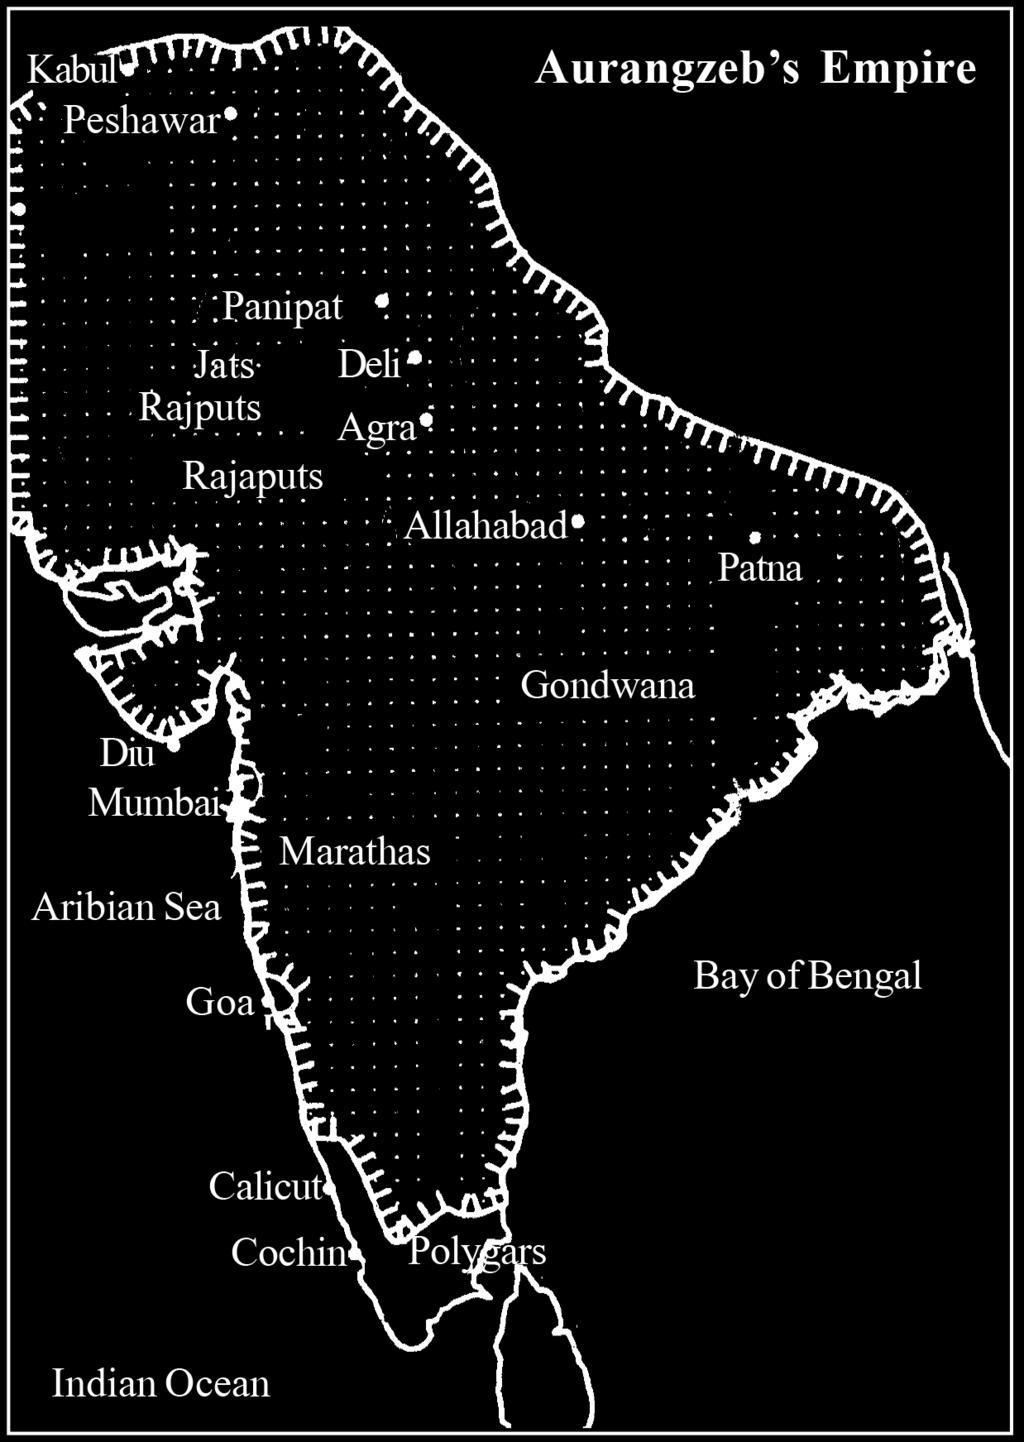 To contain the spread of the Marathas, Aurangazeb decided to invade Bijapur and Golkonda. He defeated Sikandar Shah of Bijapur and annexed his kingdom.